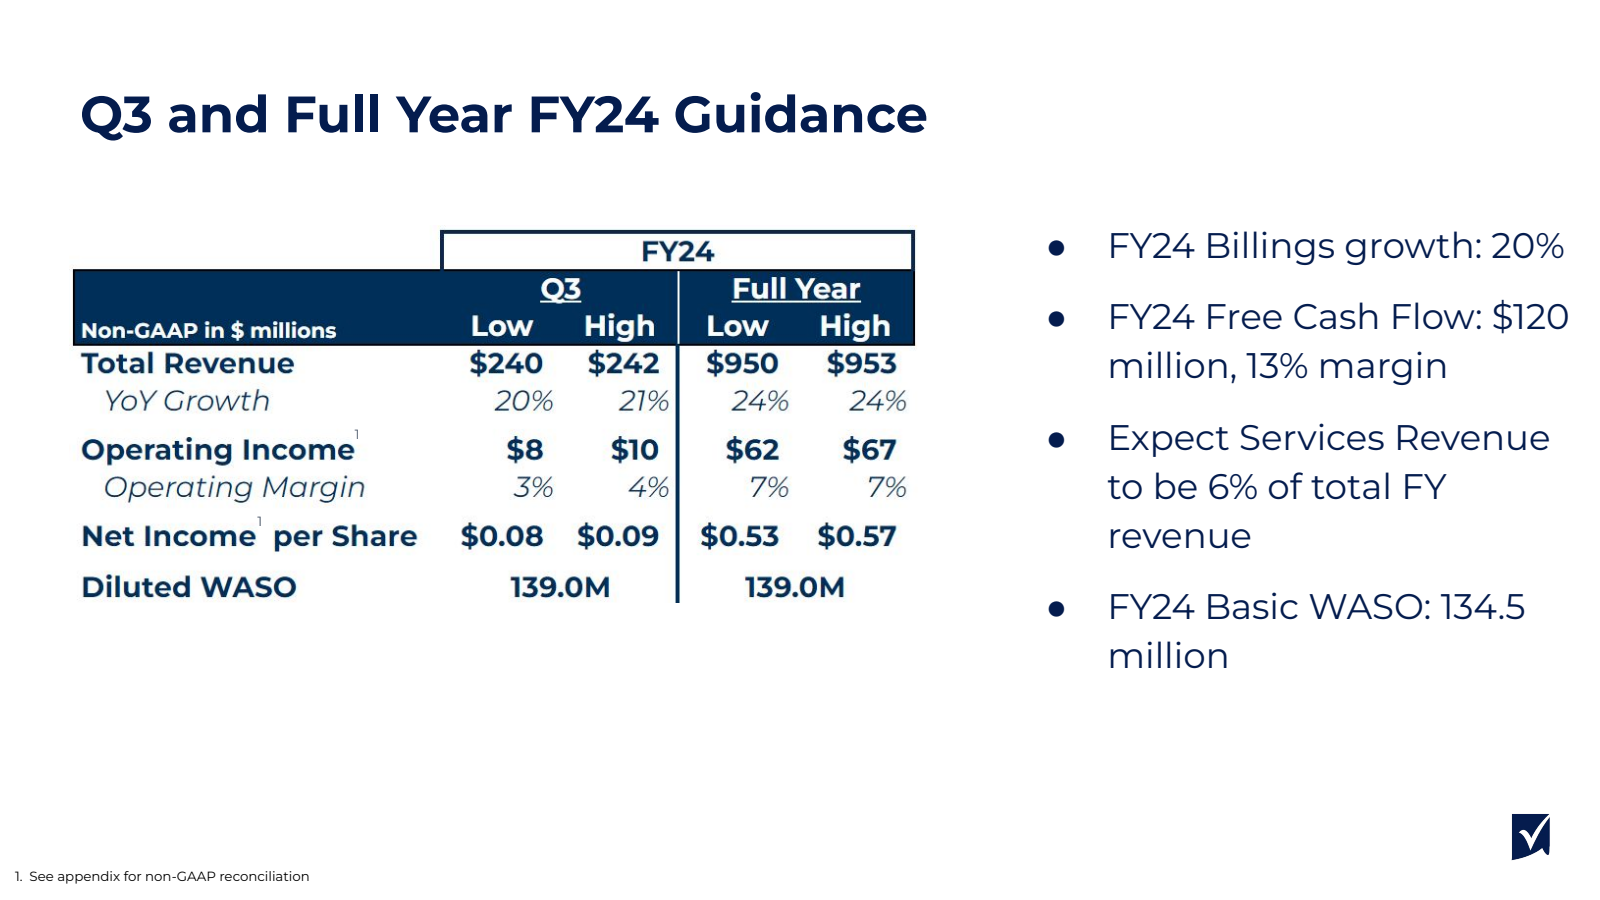 Q3 and Full Year FY2